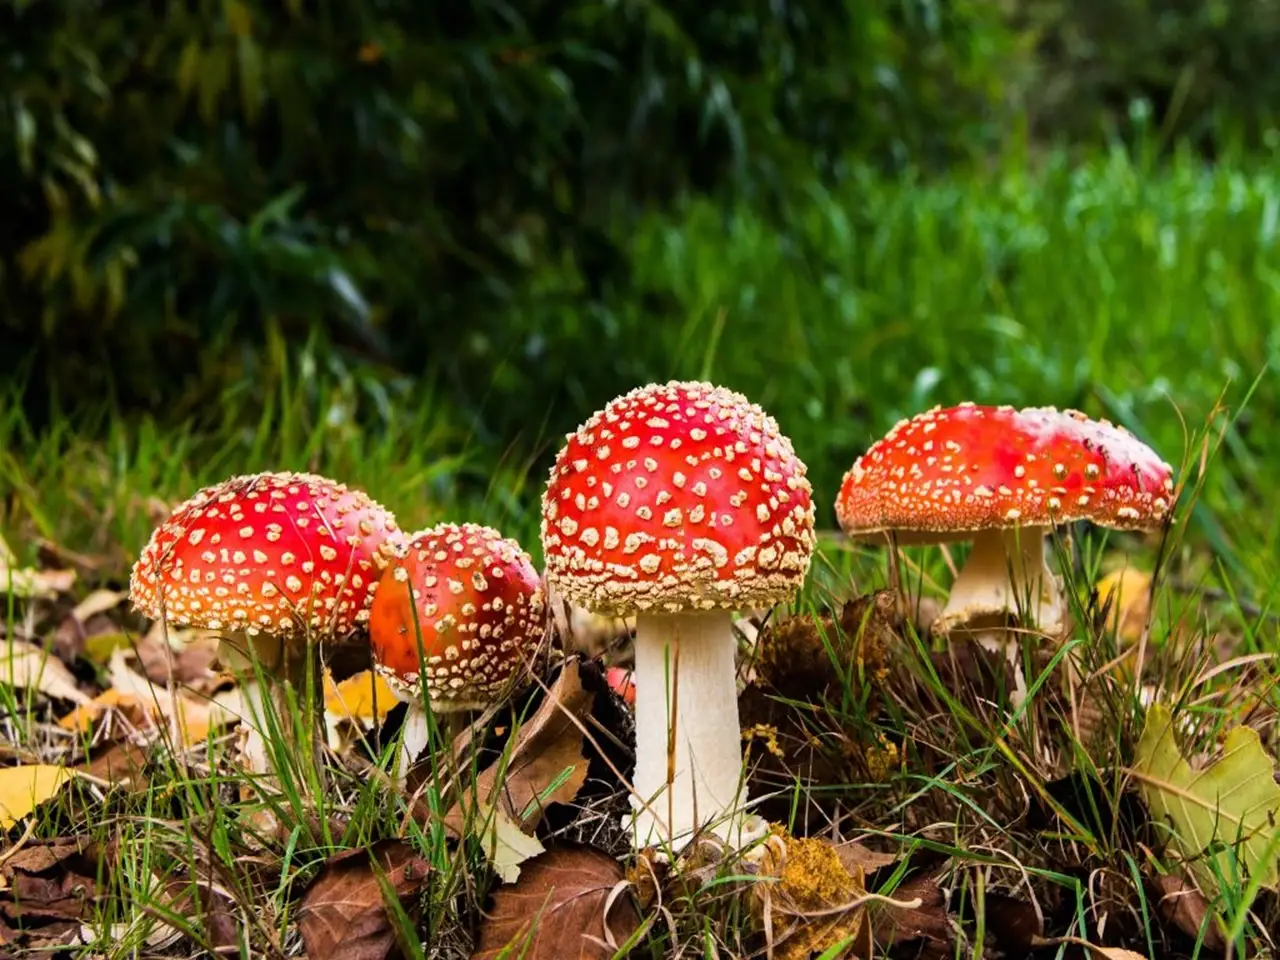 Mushrooms with red caps